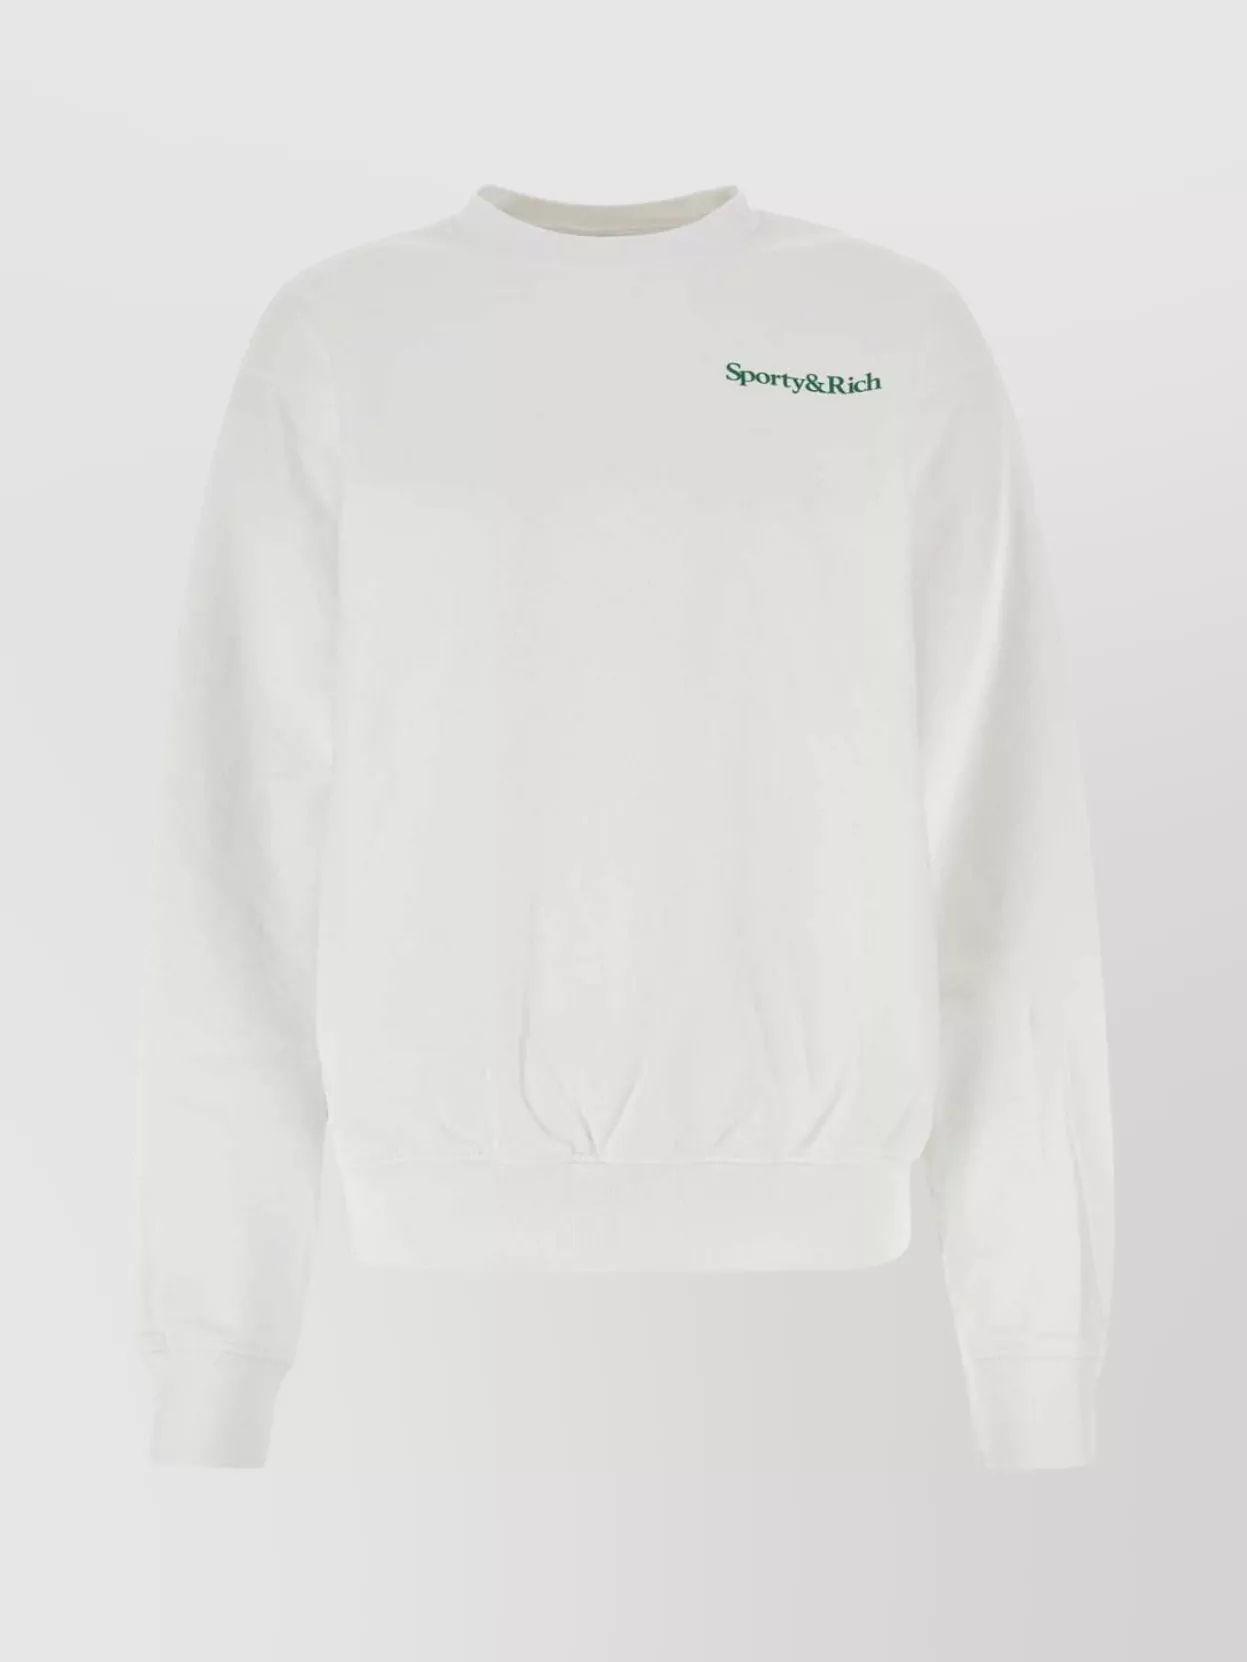 Sporty And Rich White Cotton Sweatshirt